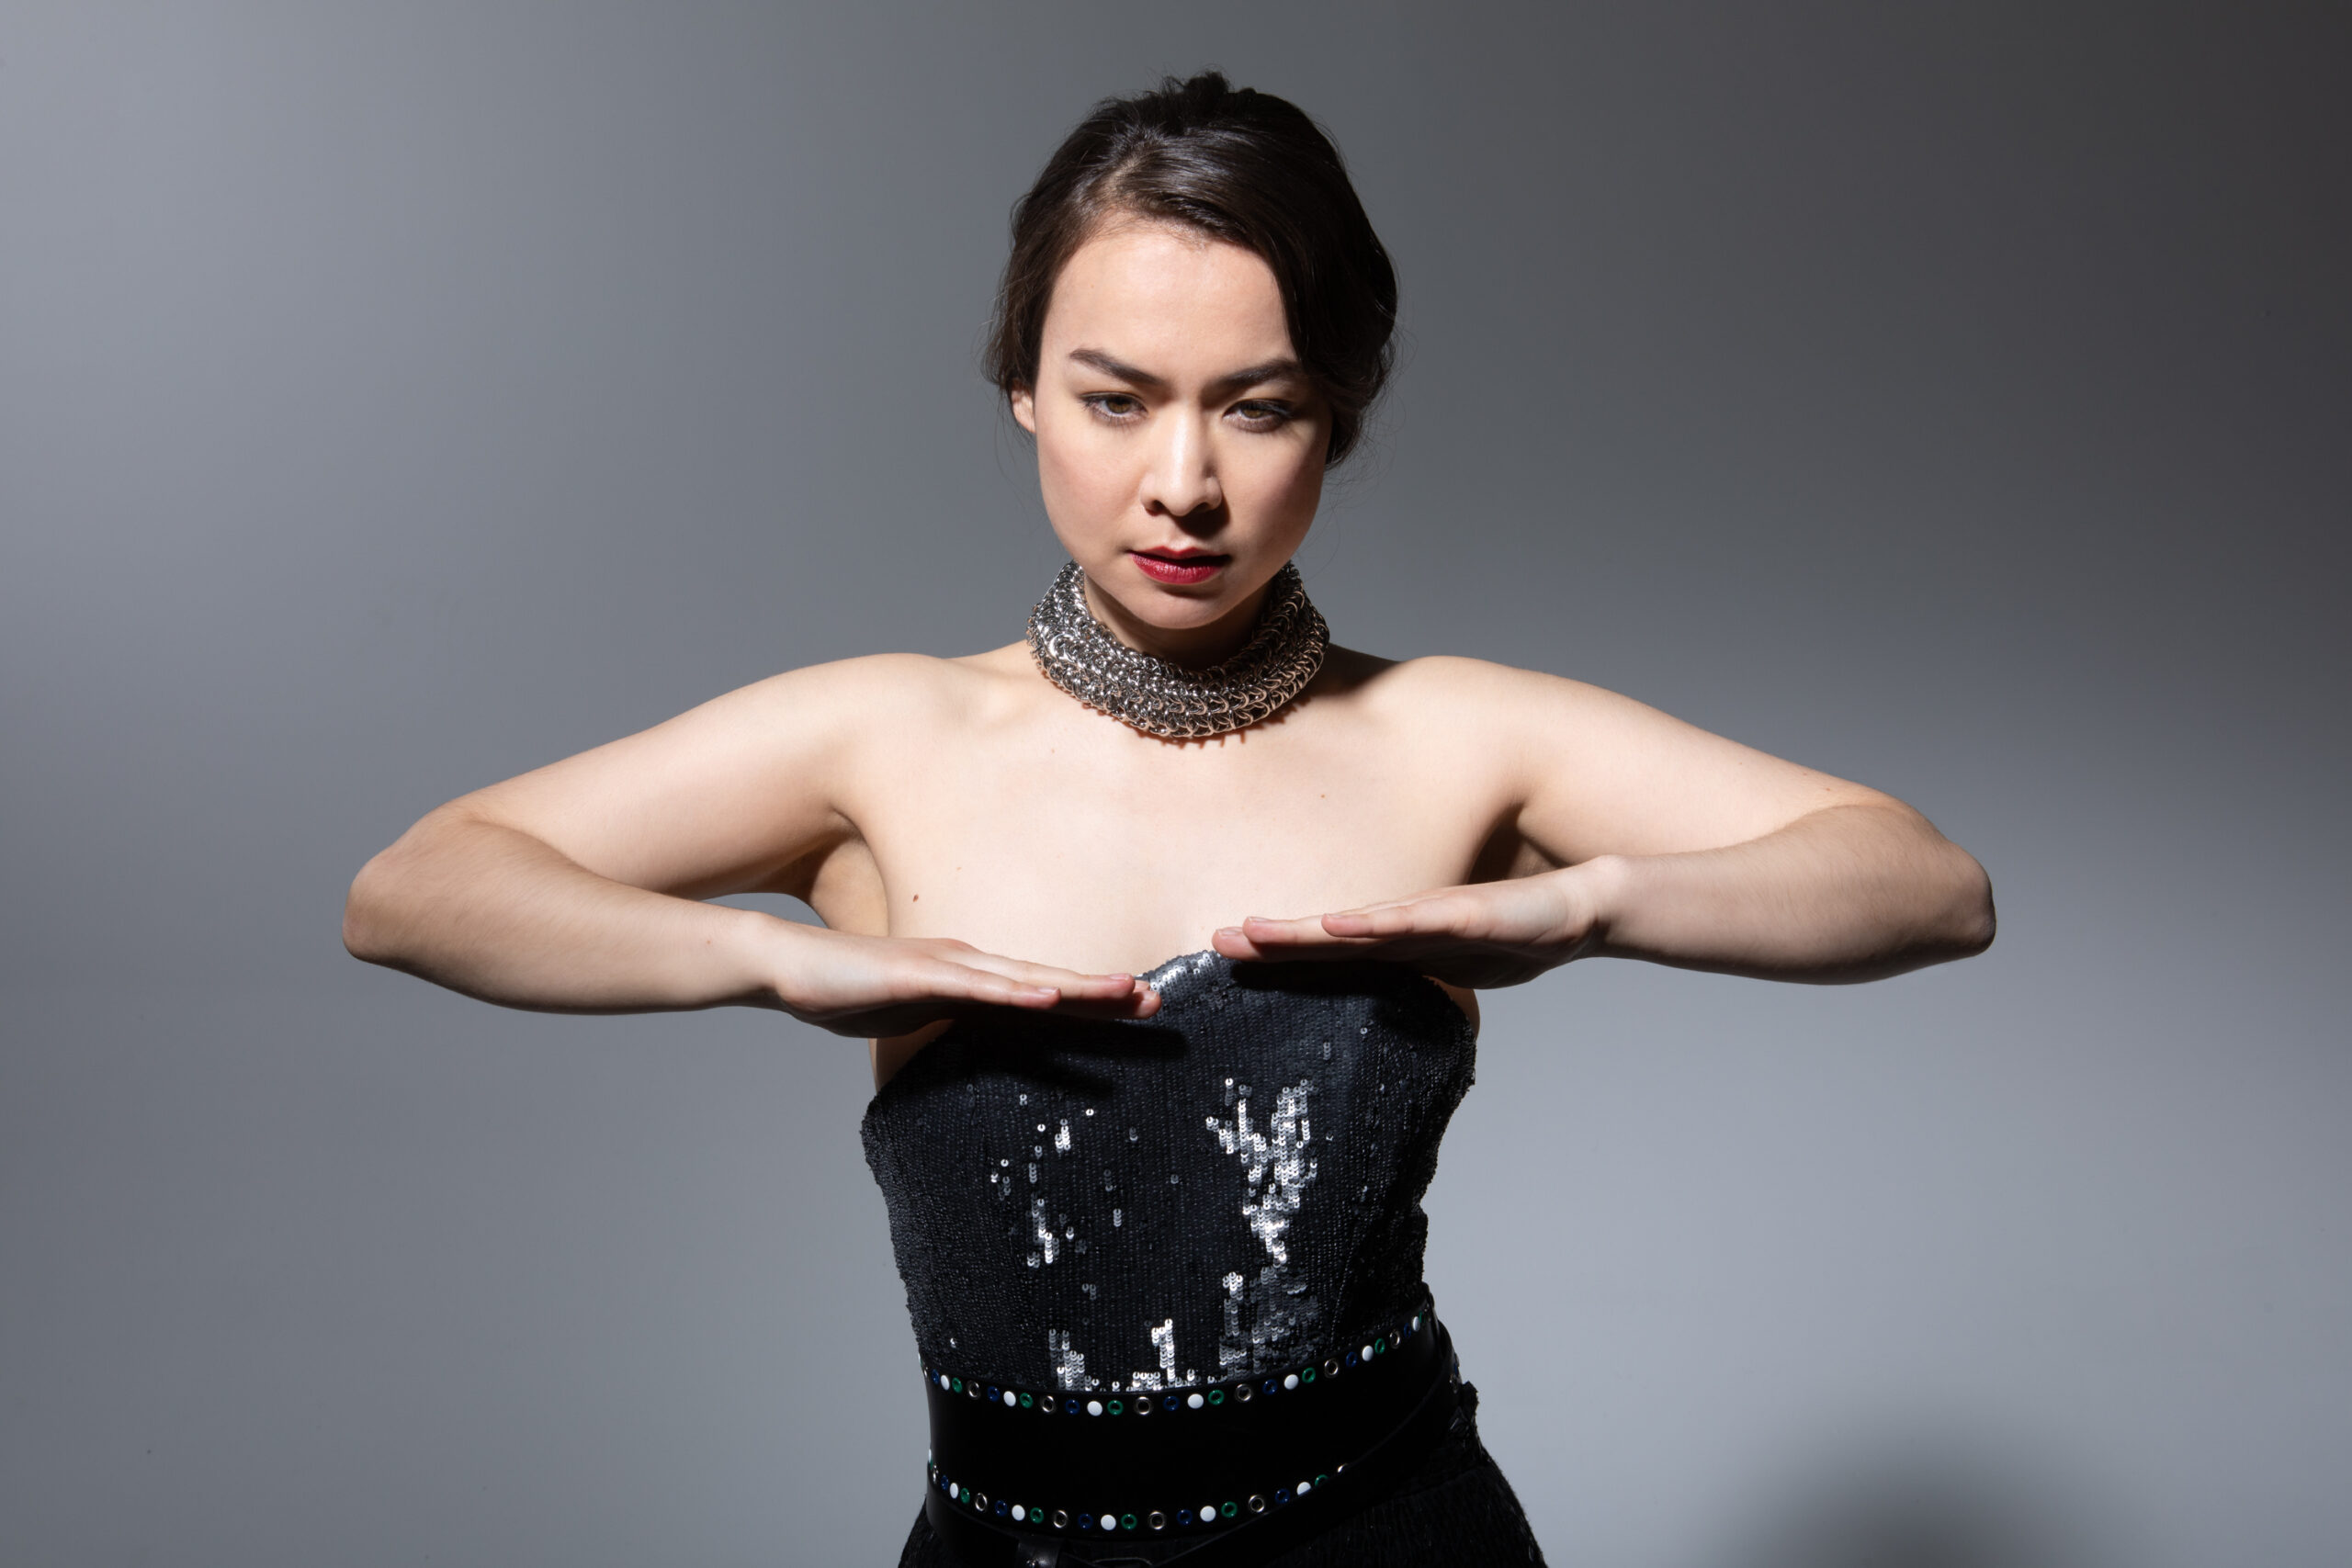 Mitski Shares VictorianInspired Video for ‘Stay Soft’ Pro Music Miami